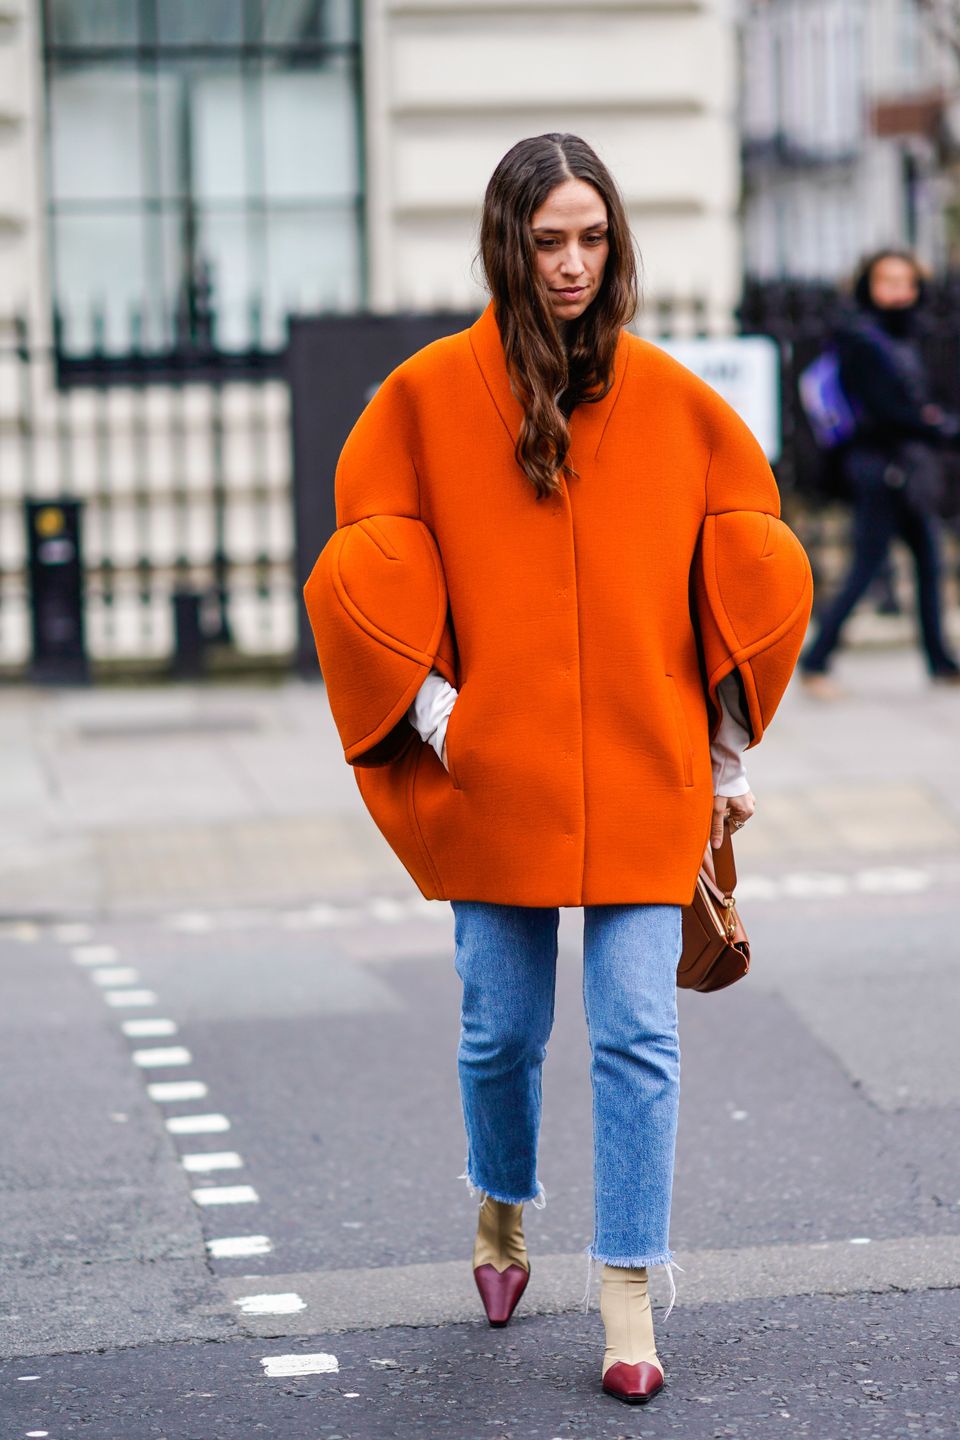 Ridiculously Oversized Coats Are Fall 2018's Comfiest Trend | HuffPost Life